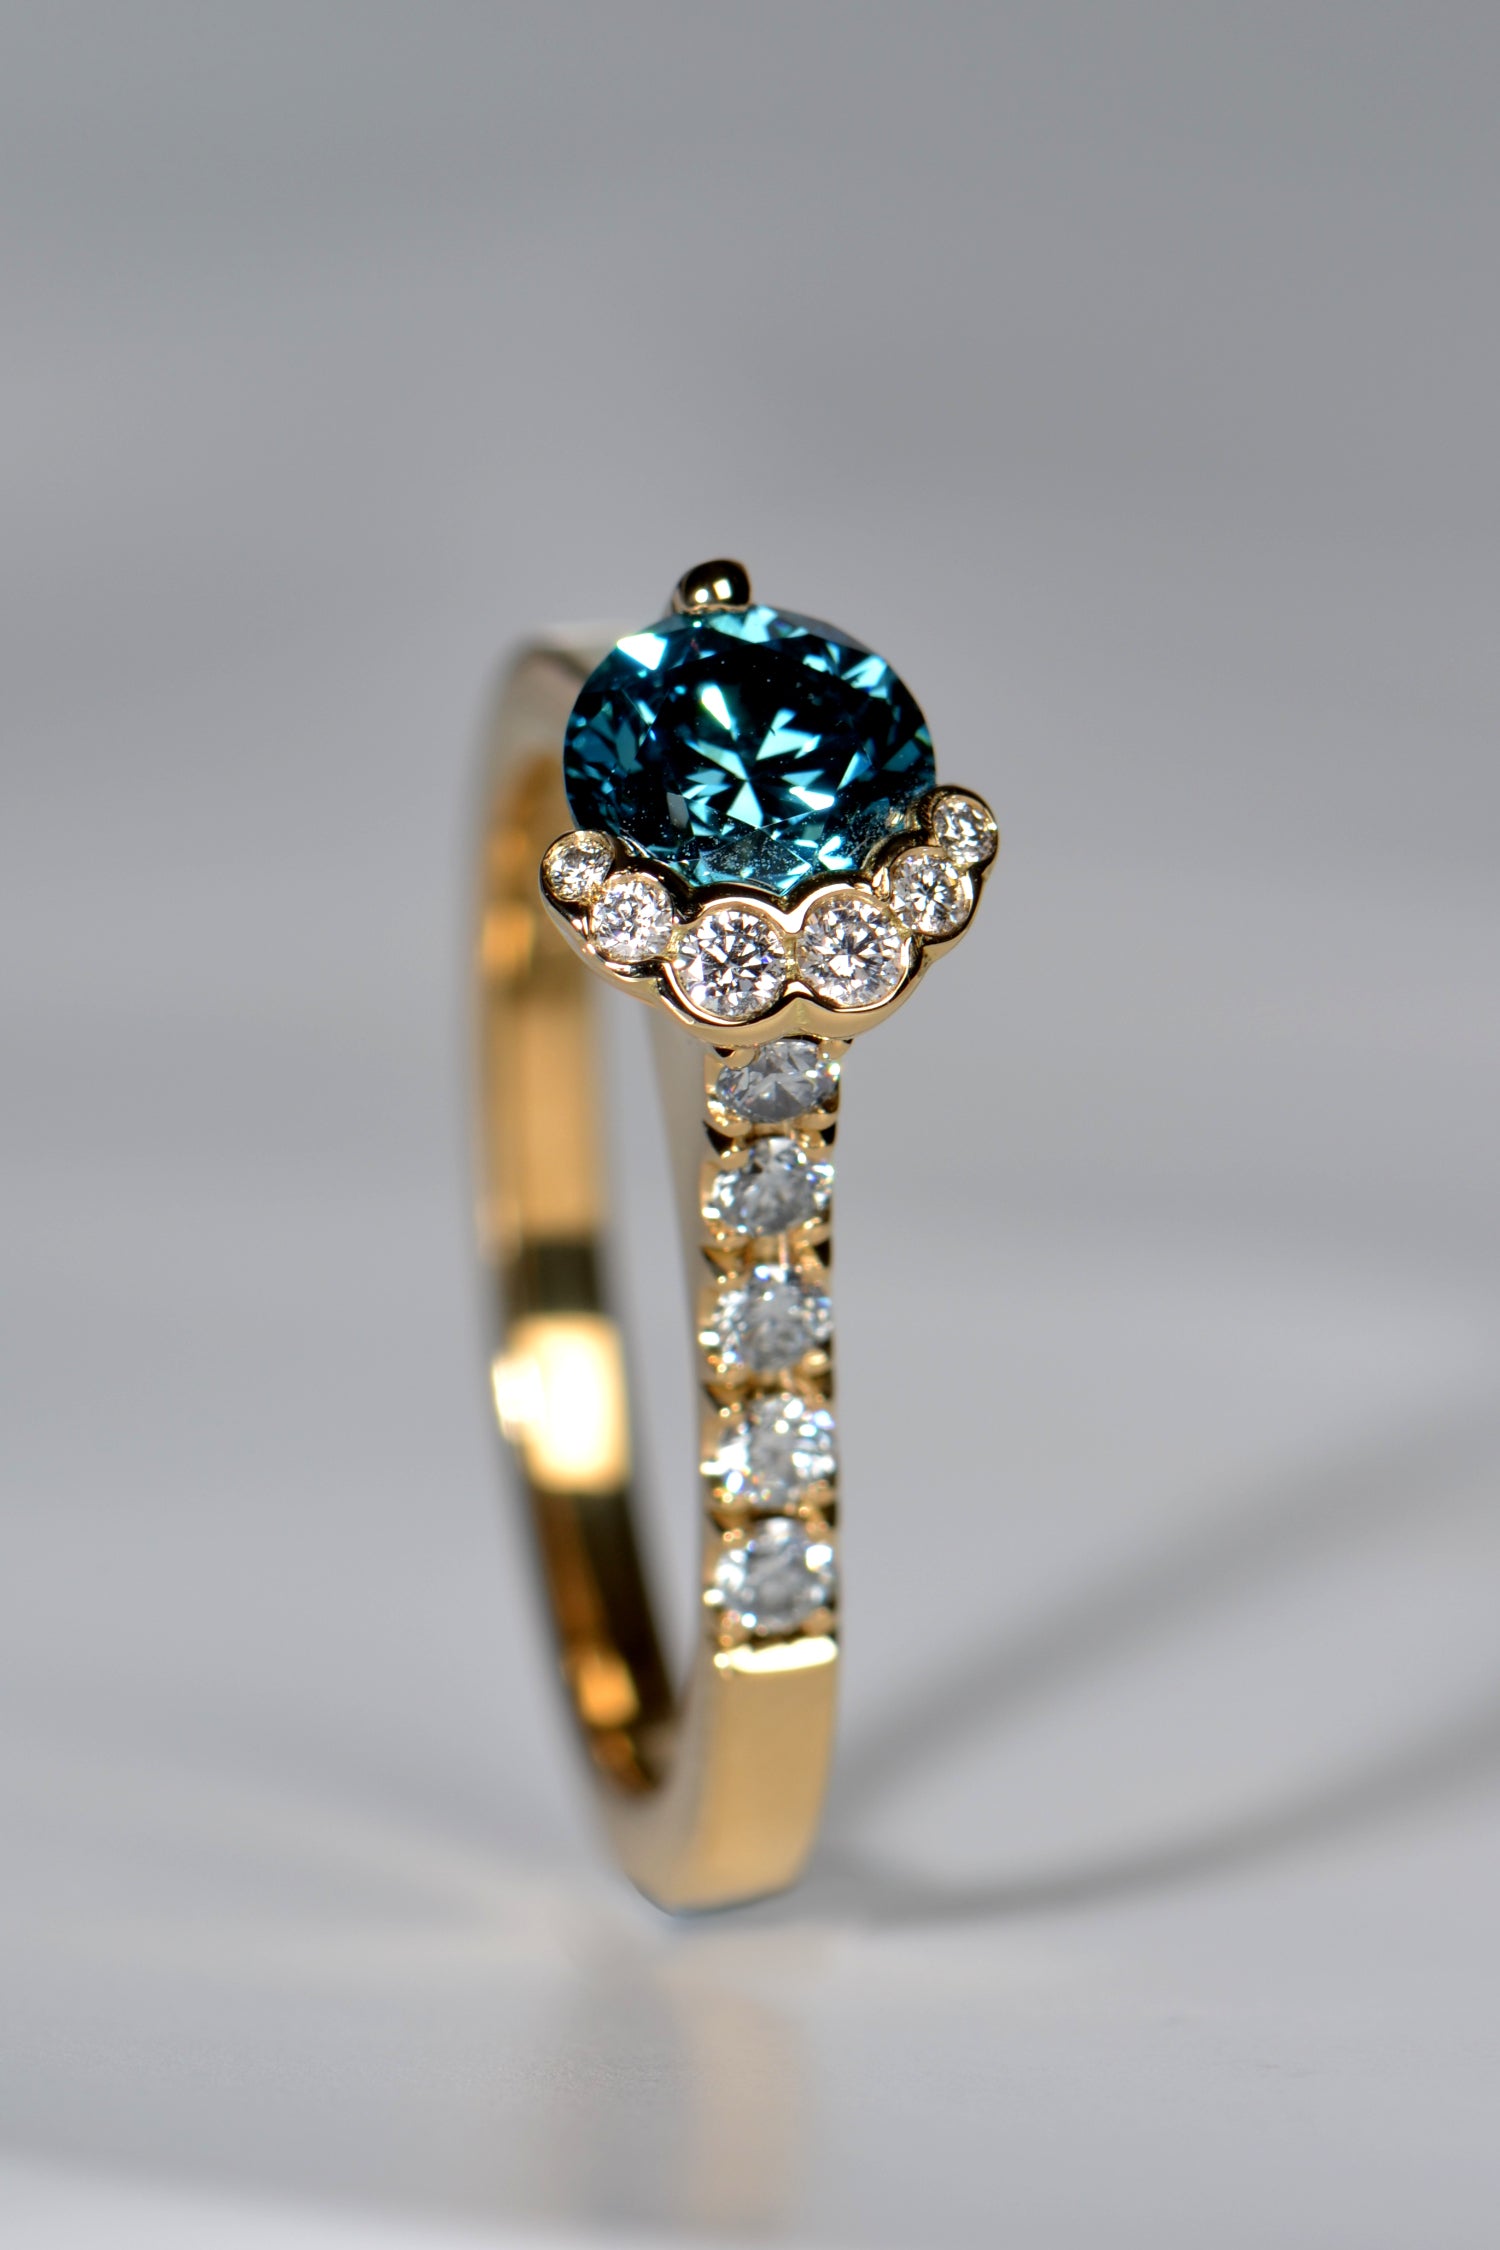 Scottish designer diamond engagement ring that is unusual and collectable set with blue and white diamonds in 18ct yellow gold